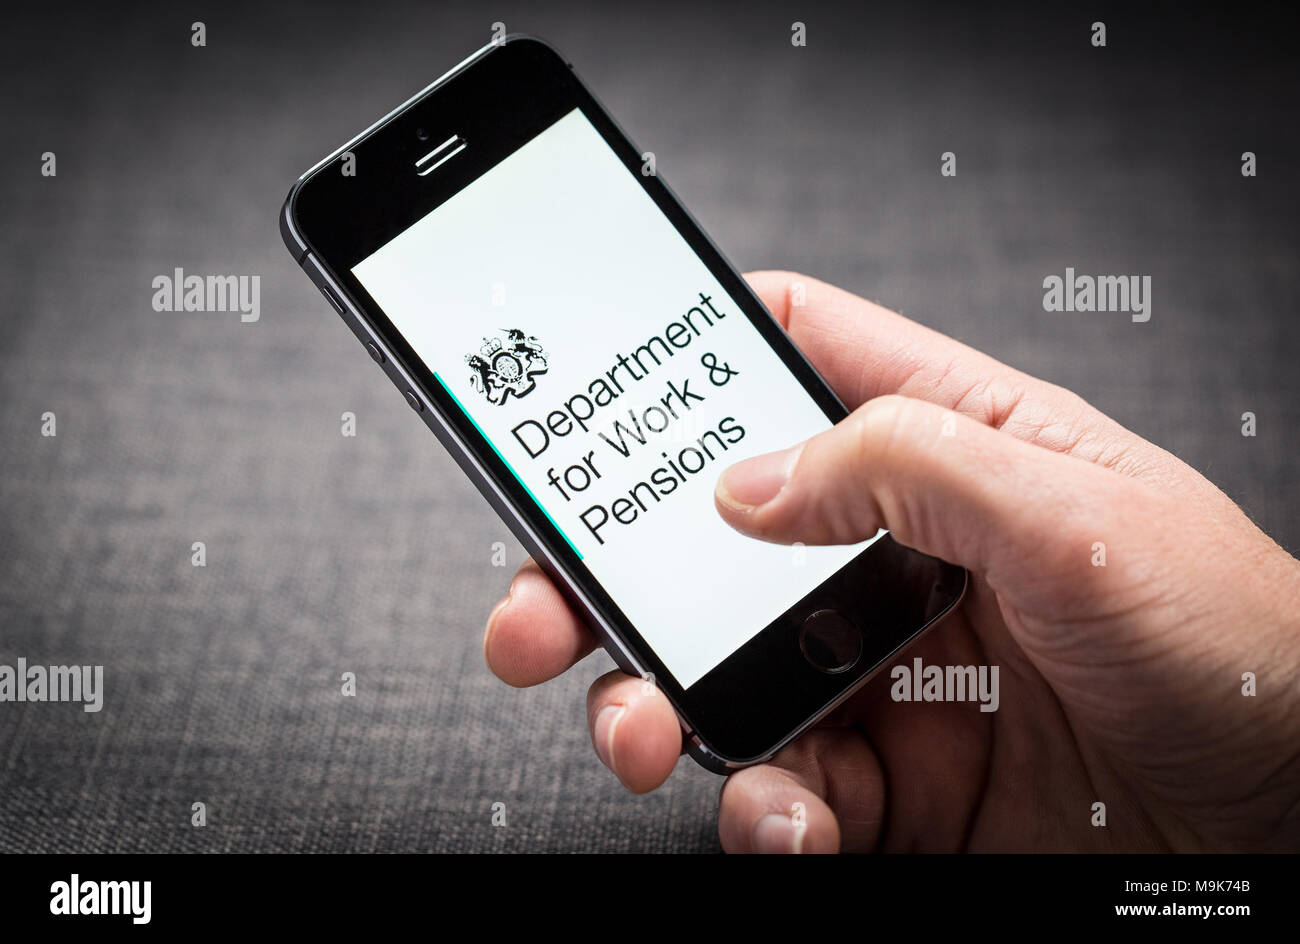 Department for Work and Pensions (DWP) website on an iPhone Stock Photo